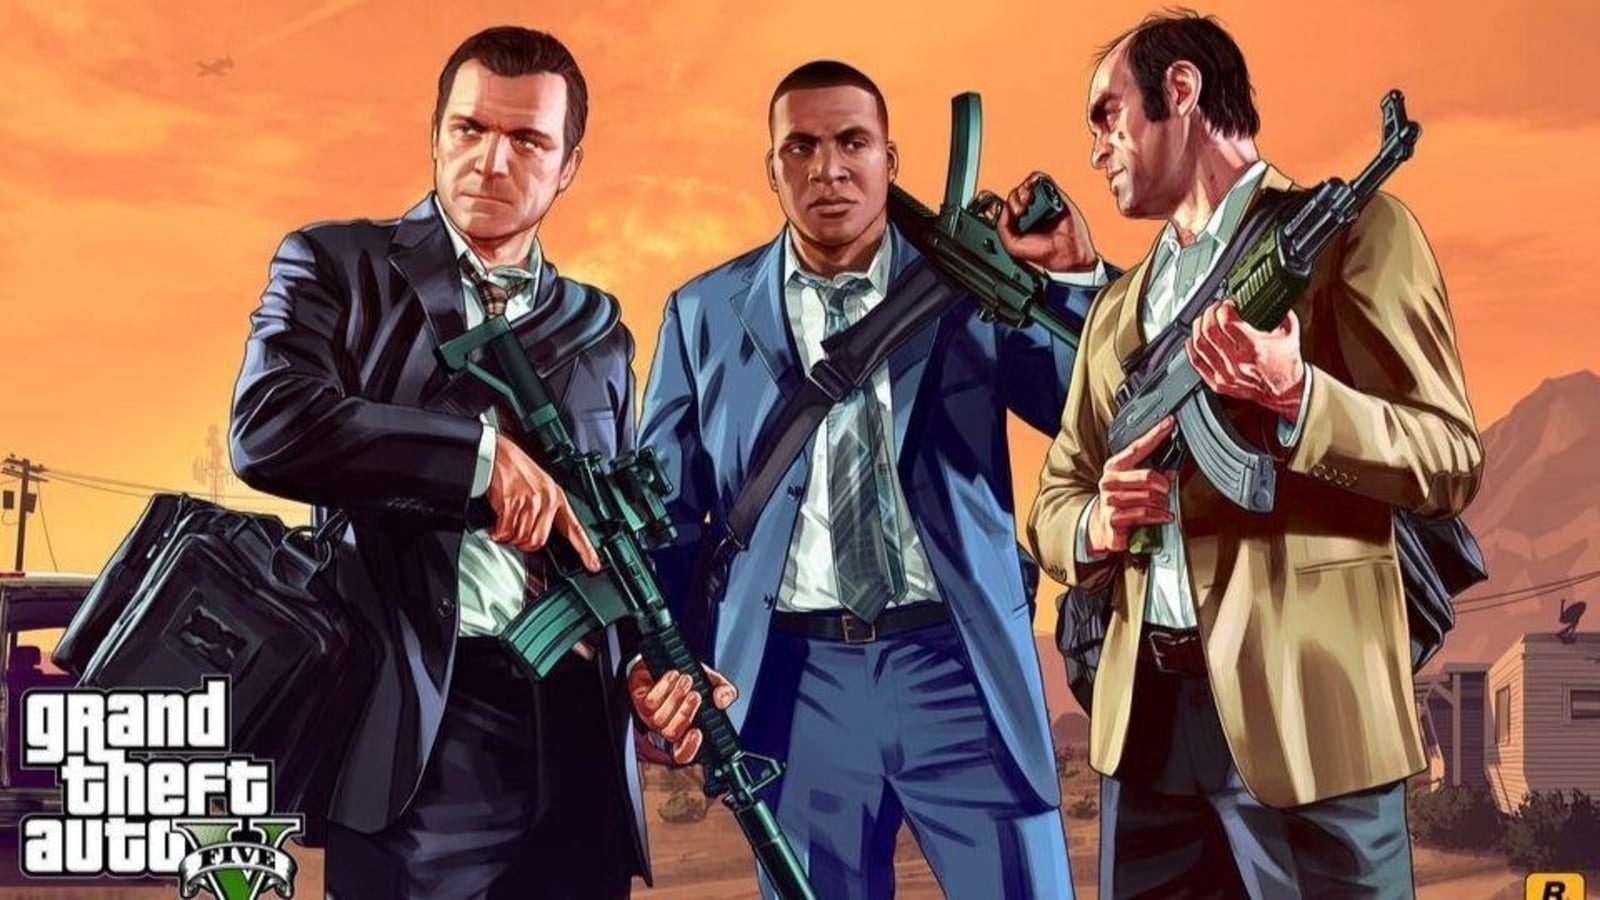 GTA 5 cheats: Check Grand Theft Auto 5 cheat codes for PC, PlayStation and  Xbox